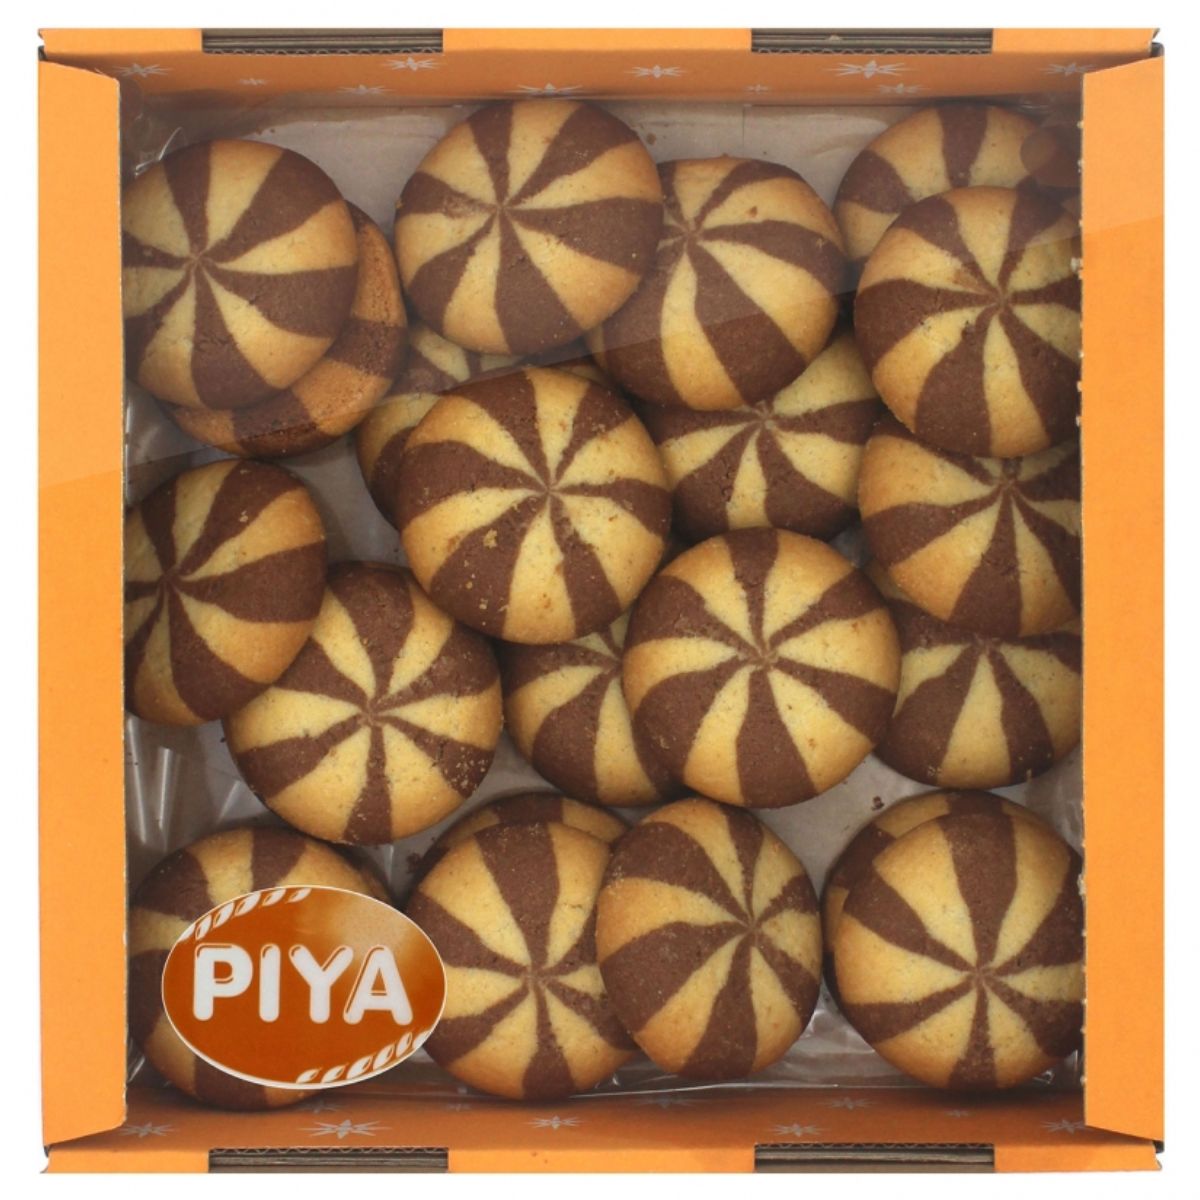 Piya cookies with Hazelnut Cream in a box on a white background.